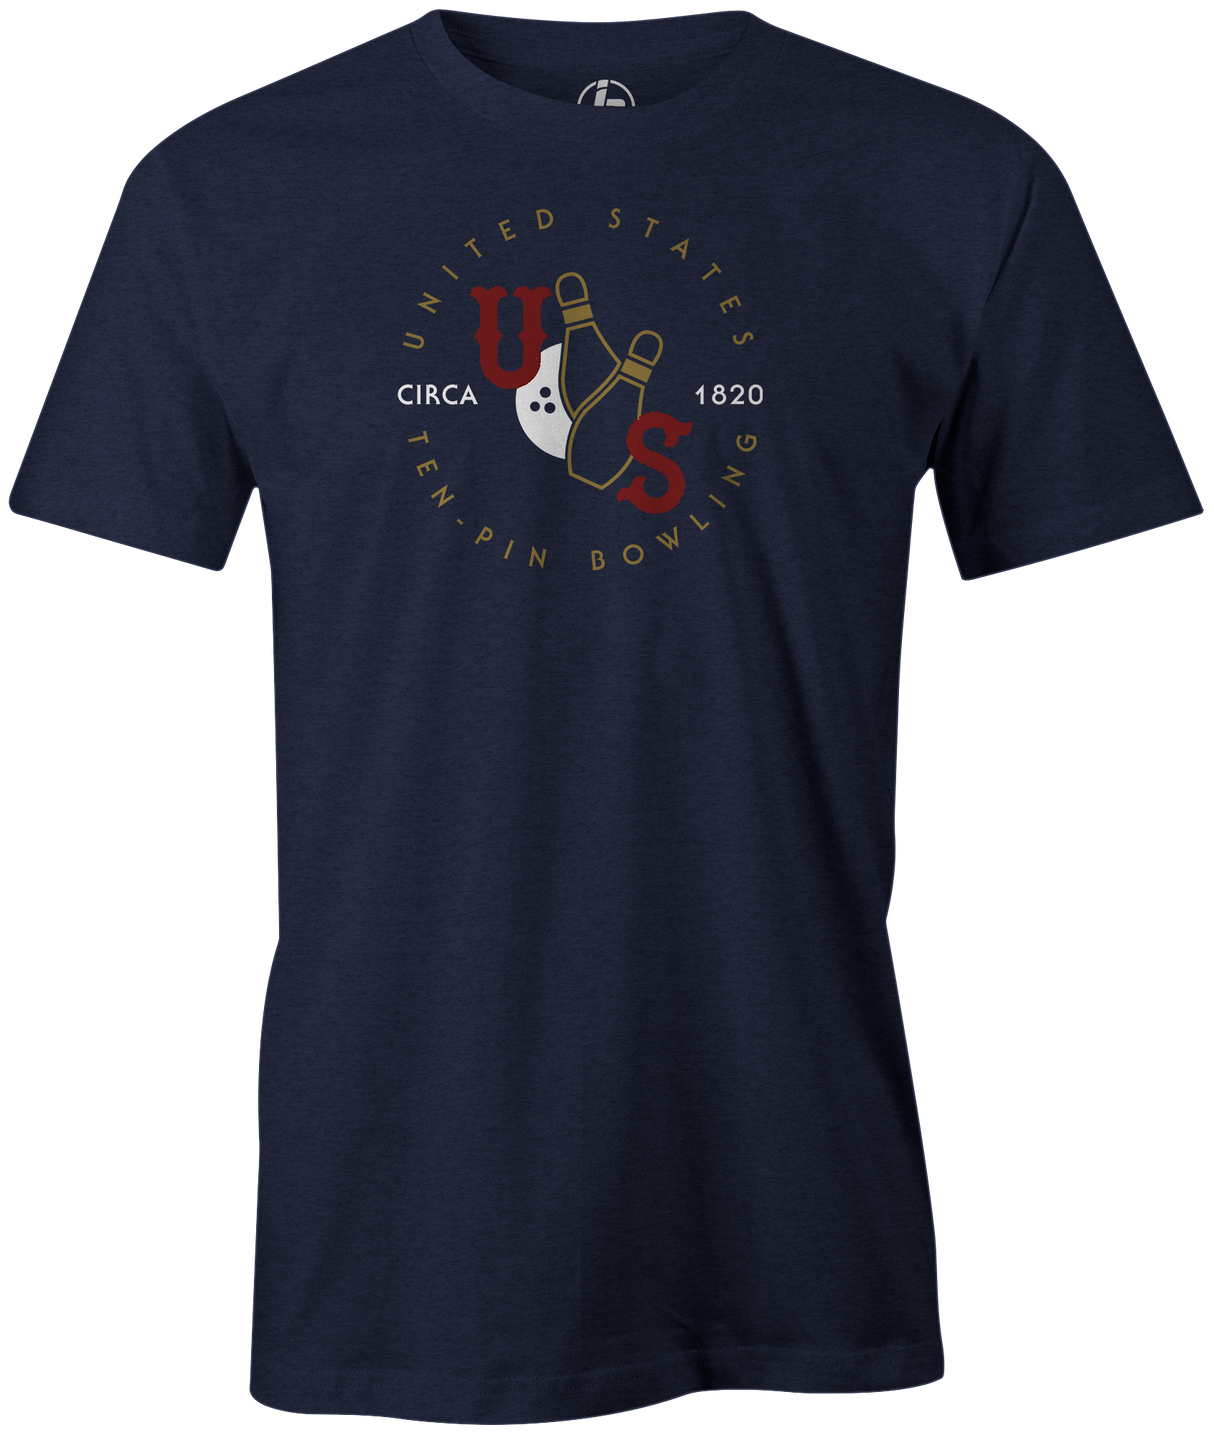 70 million people in the United States love bowling... United States Ten Pin Bowling est 1820! ! Join the elite club of bowlers in America. Patriotic bowling shirt. Bowling tee, tee-shirt, tshirt, t-shirt. USA. Bowling league shirt. Team bowling shirt. Navy